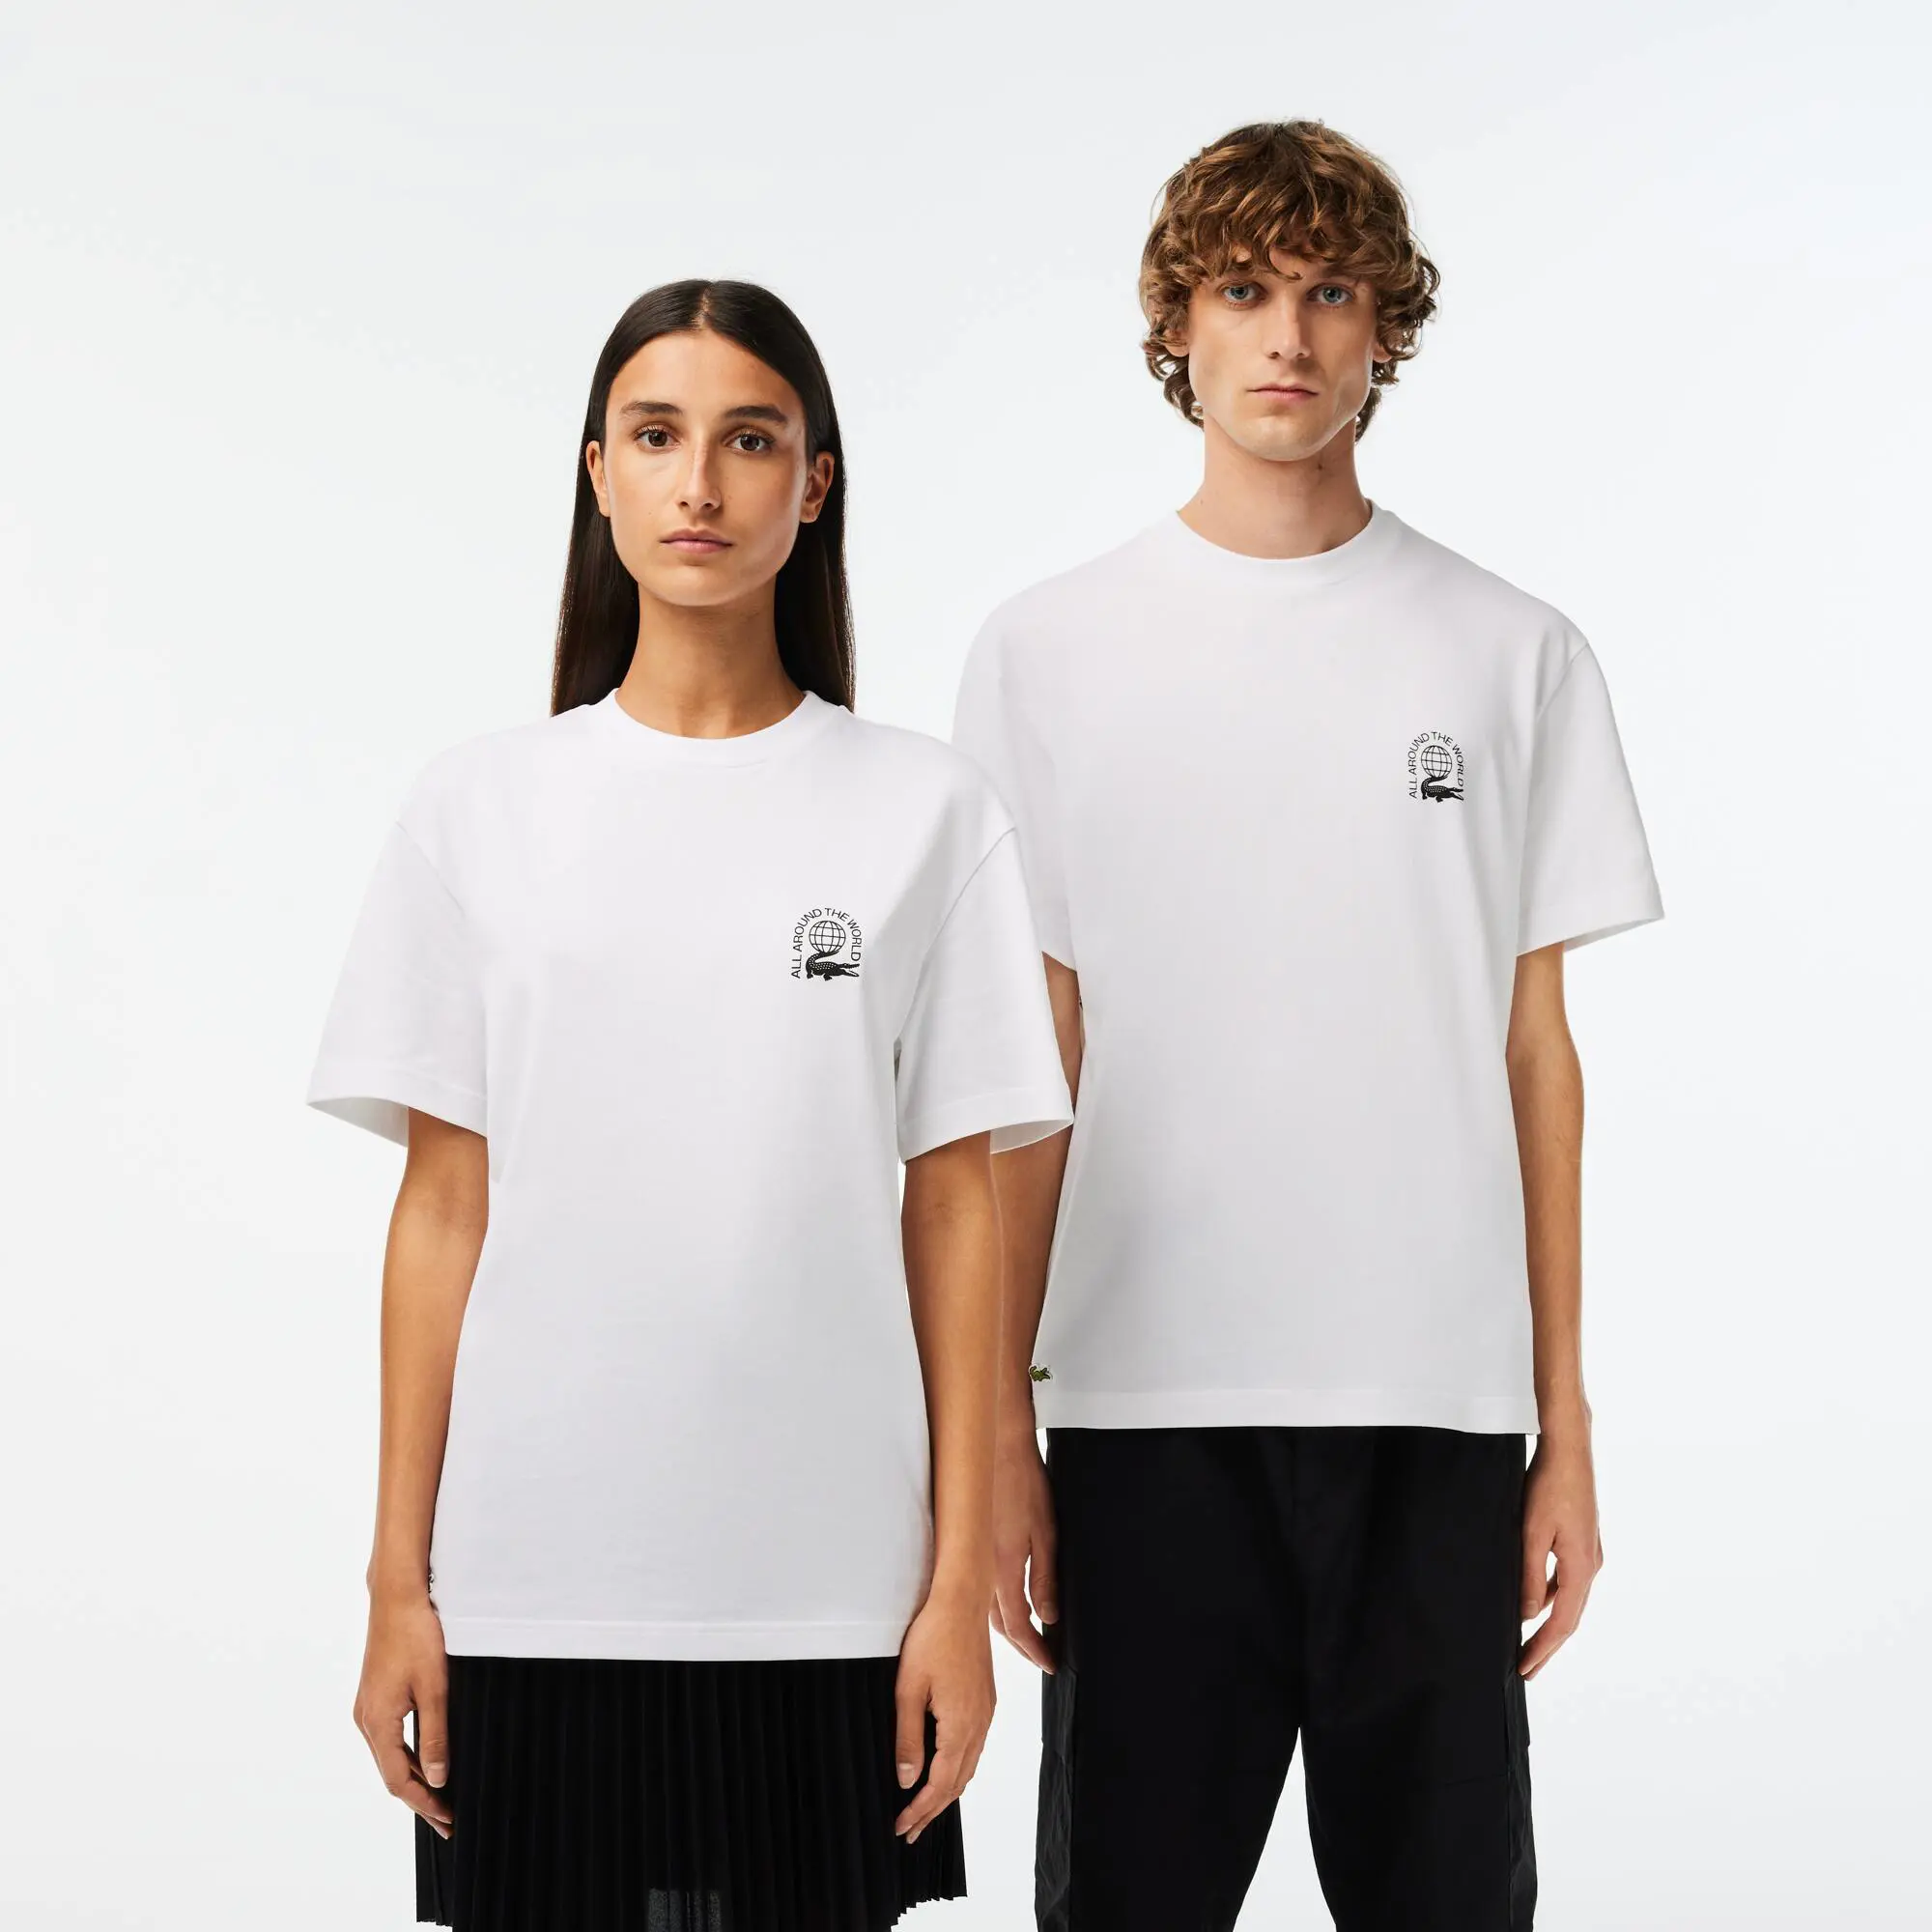 Lacoste Men’s Relaxed Fit Organic Cotton Jersey T-Shirt. 1